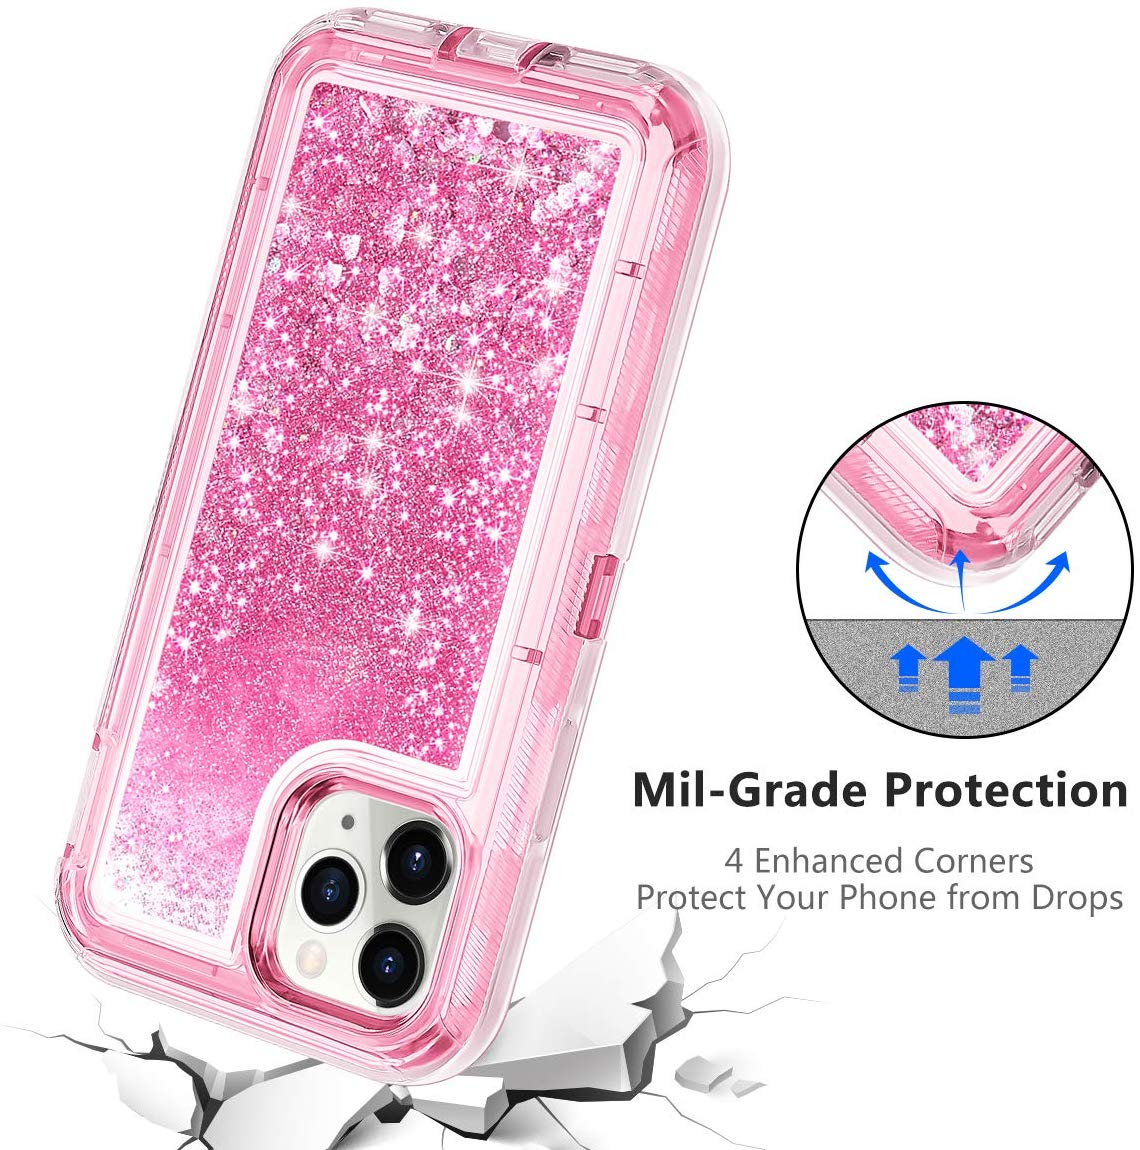 Heromiracle Compatible with iPhone 11 Case Luxury Square Trunk Box Durable Glitter Cover for Women Girls Lady Girly Cute Bumper 6.1 inch (Pink)